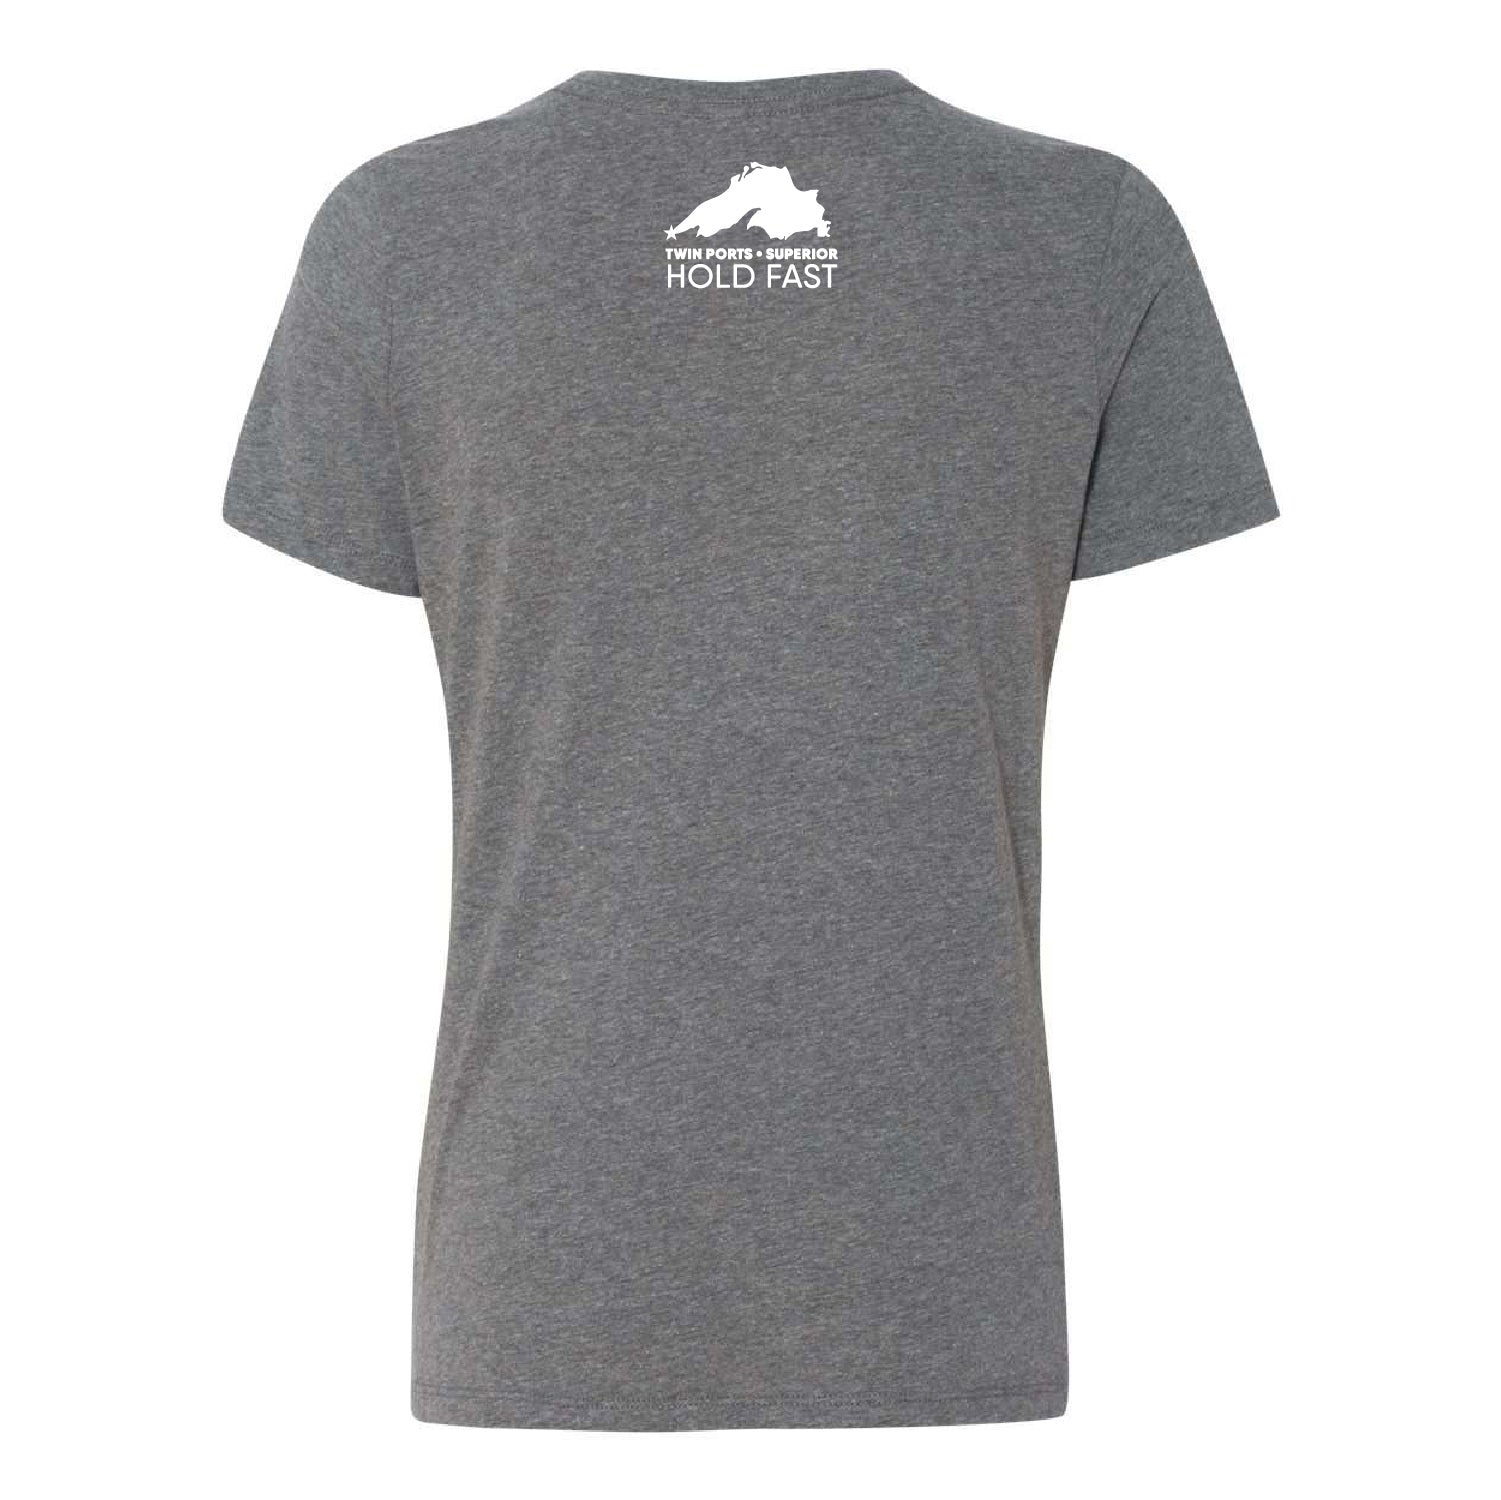 Earth Rider North Tower Stout Women's Tee